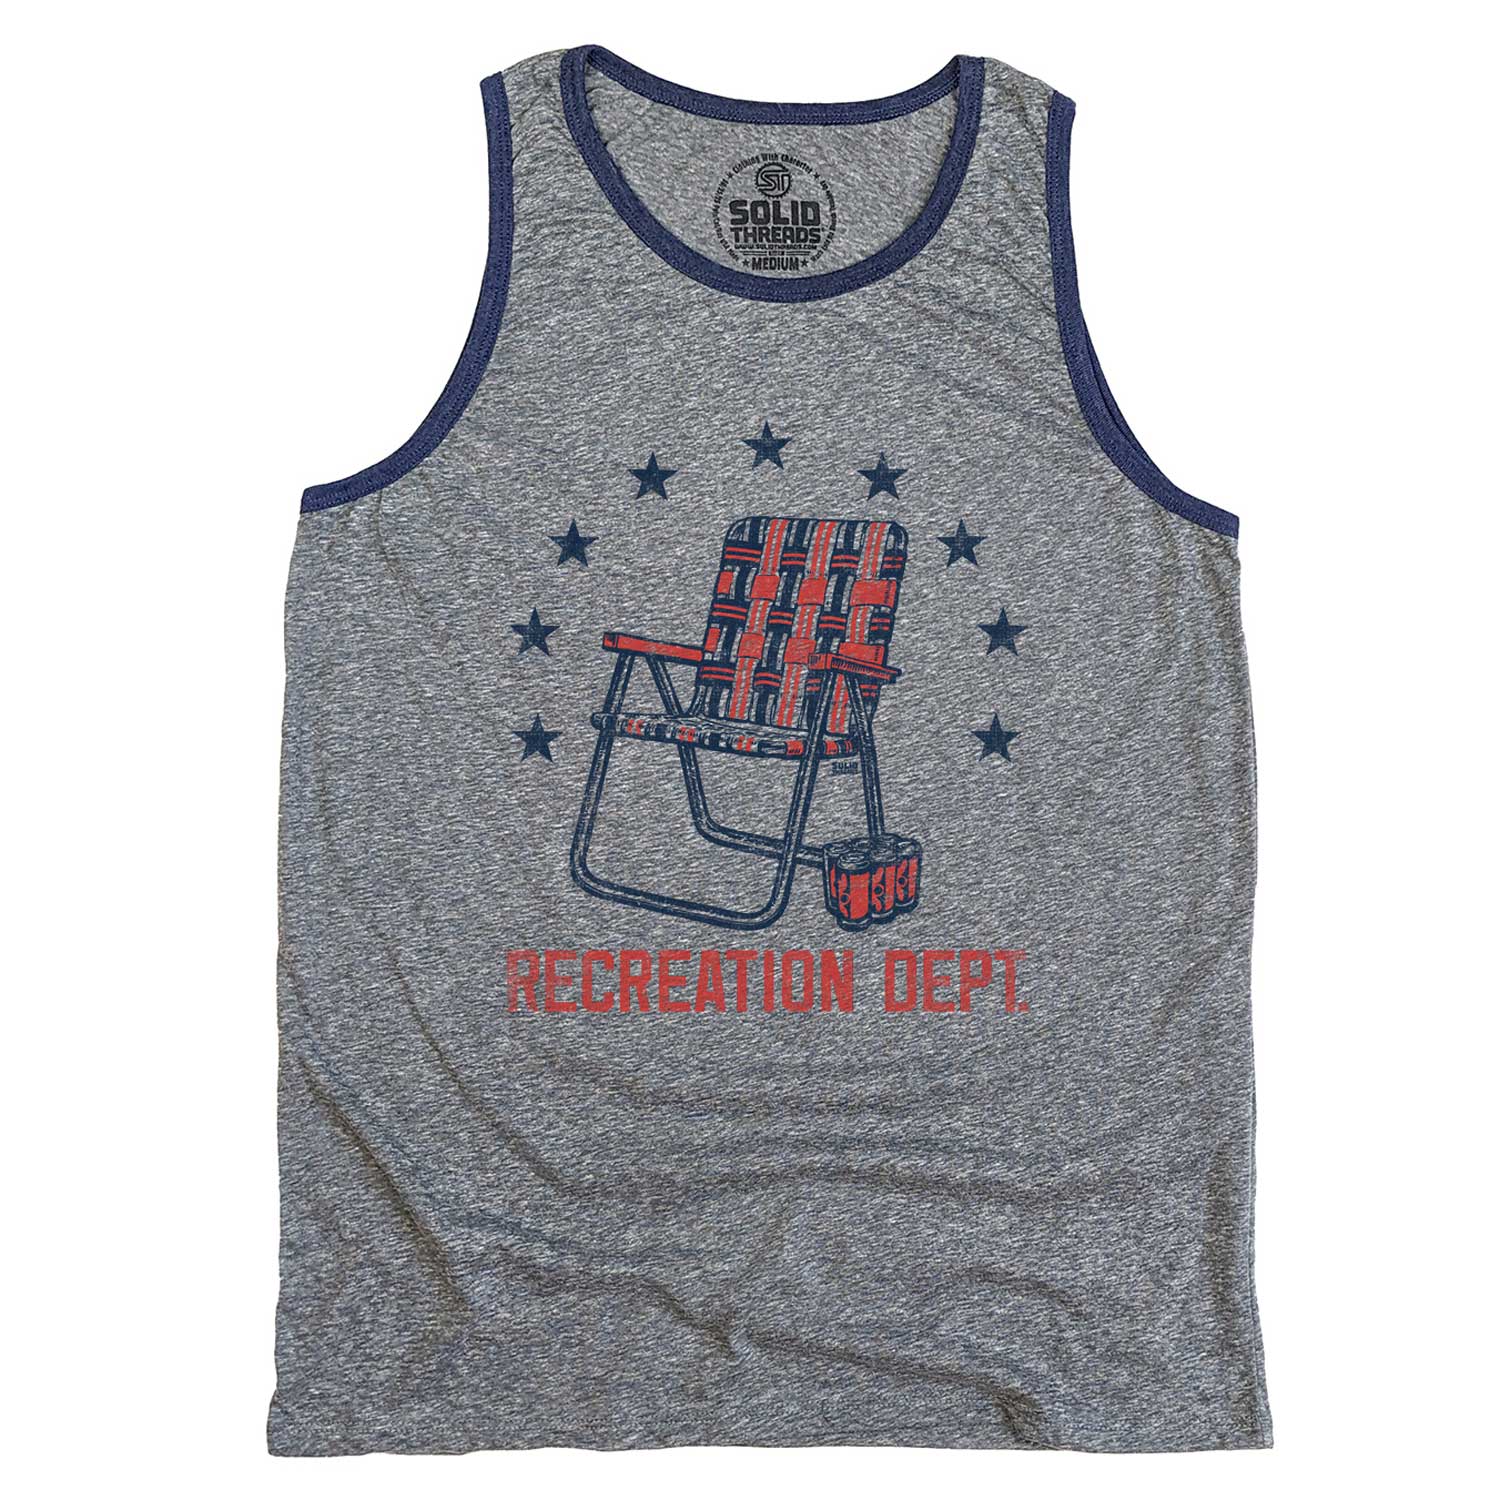 Men's Recreation Department Vintage Graphic Tank Top | Cool Summer T-shirt | Solid Threads